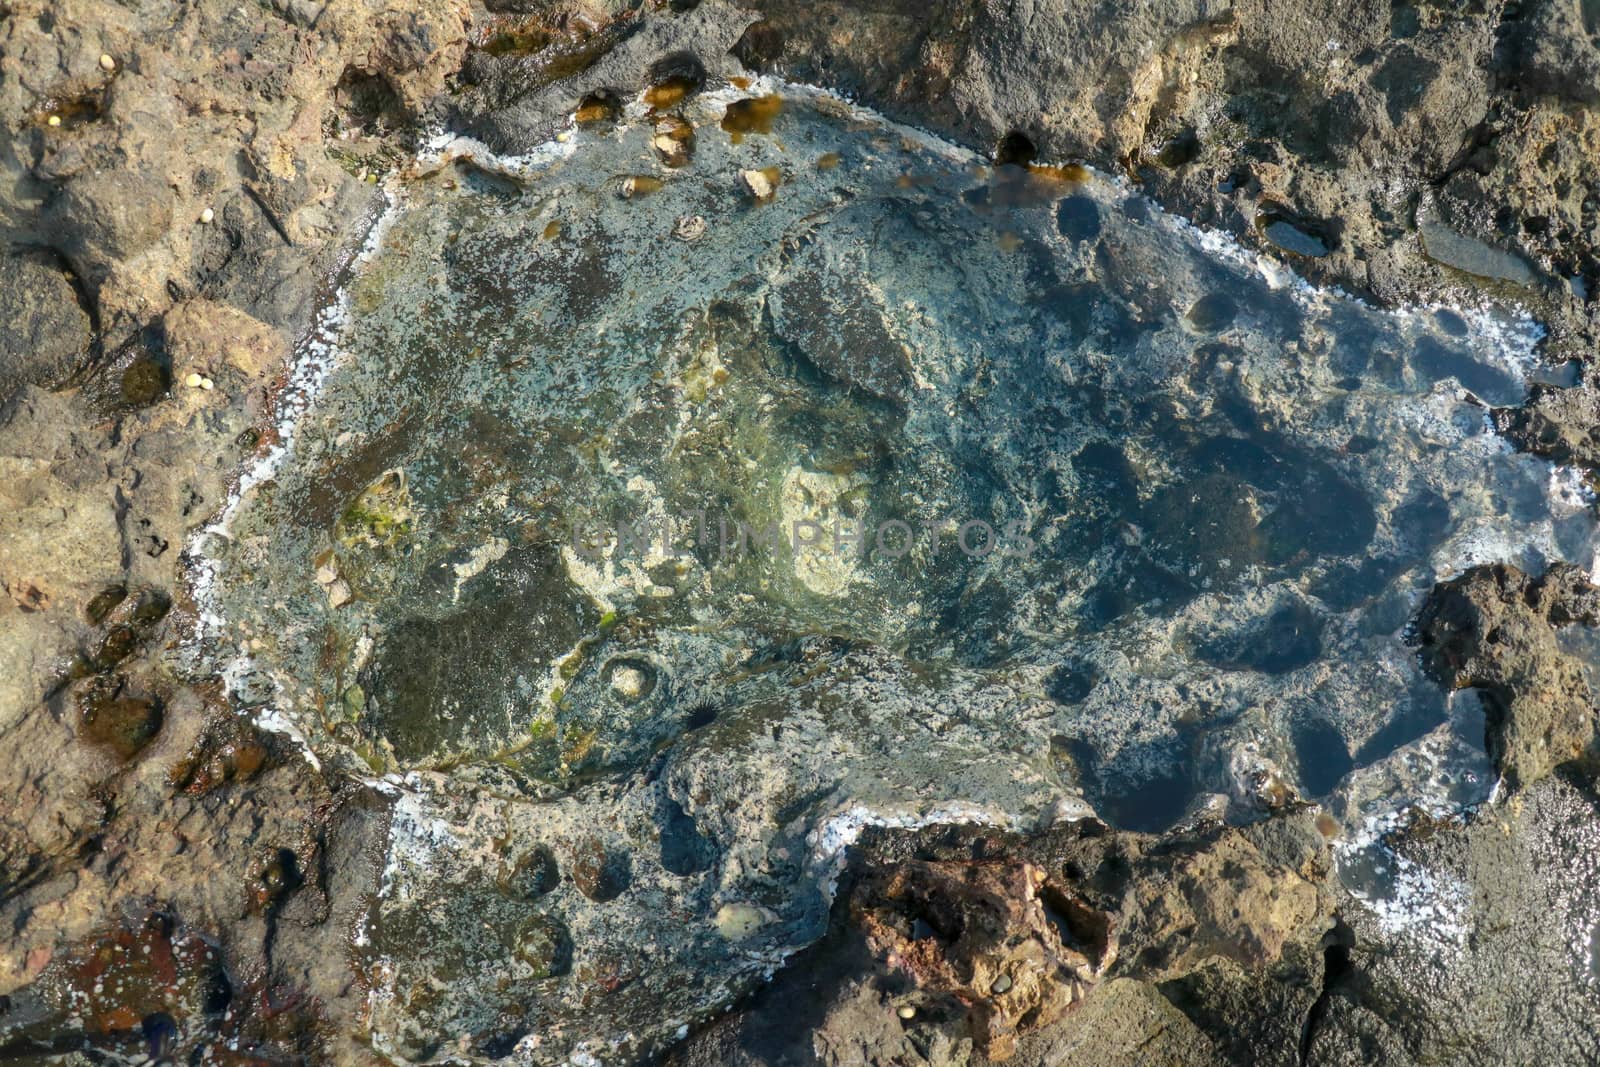 Water puddle and rock texture at the ocean coast.